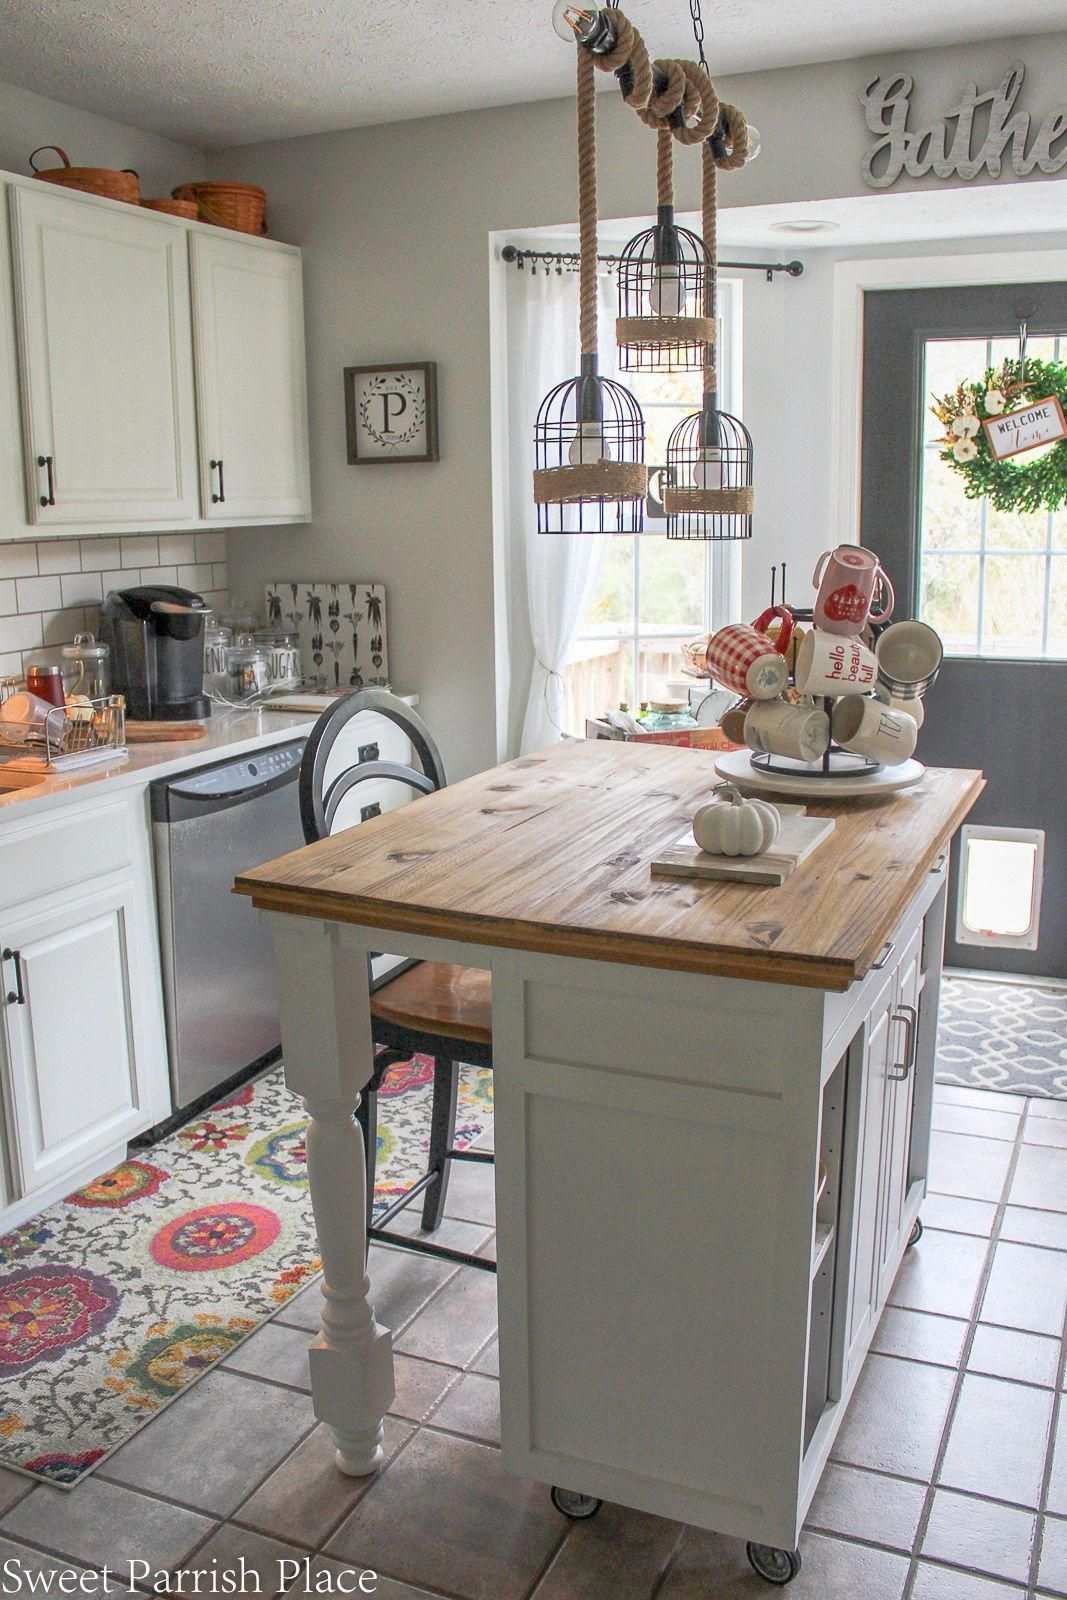 25 Small Kitchen Decor Ideas On A Budget To Maximize Existing The